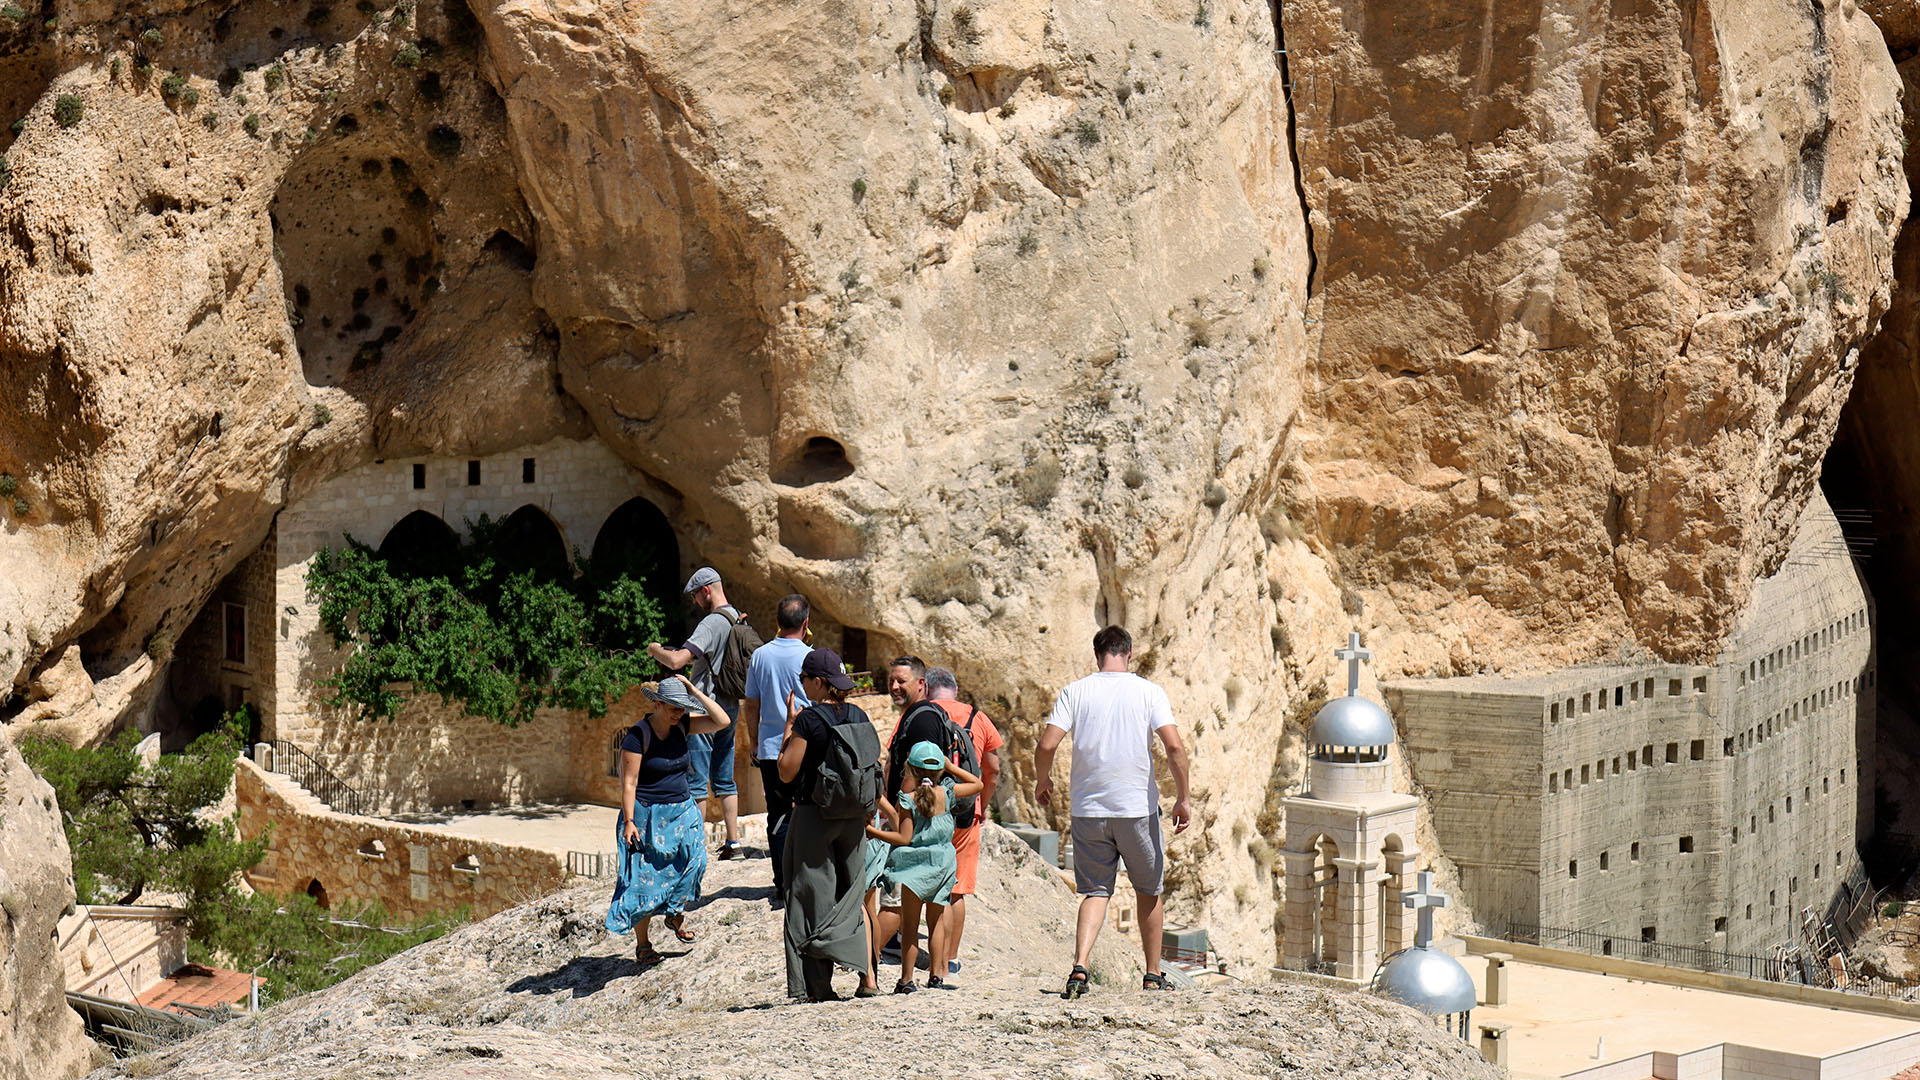 A photograph captures a group of tourists strolling towards the churches of Maalula, with a massive rock looming in the background.